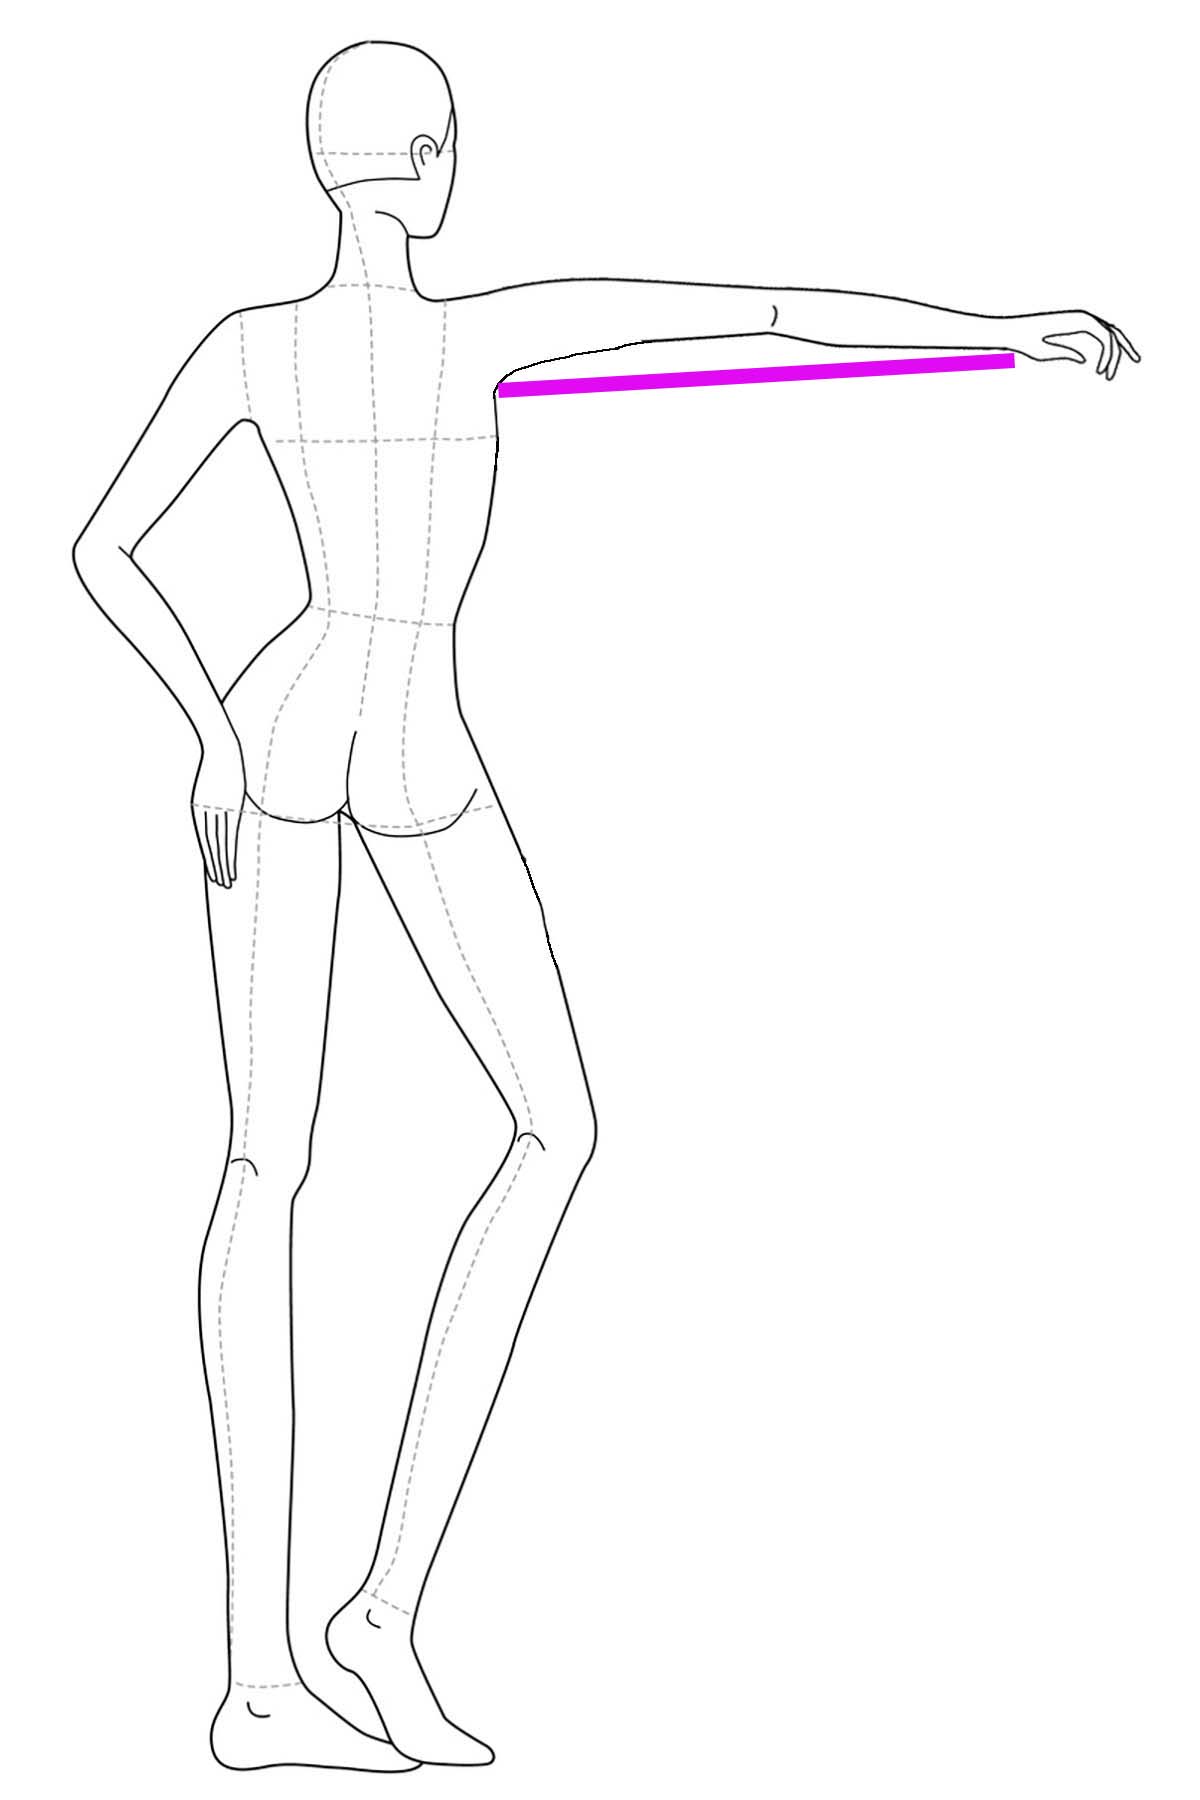 A drawing of a female body, back view with one arm extended. A bright pink line has been drawn on it to indicate under arm measurement.